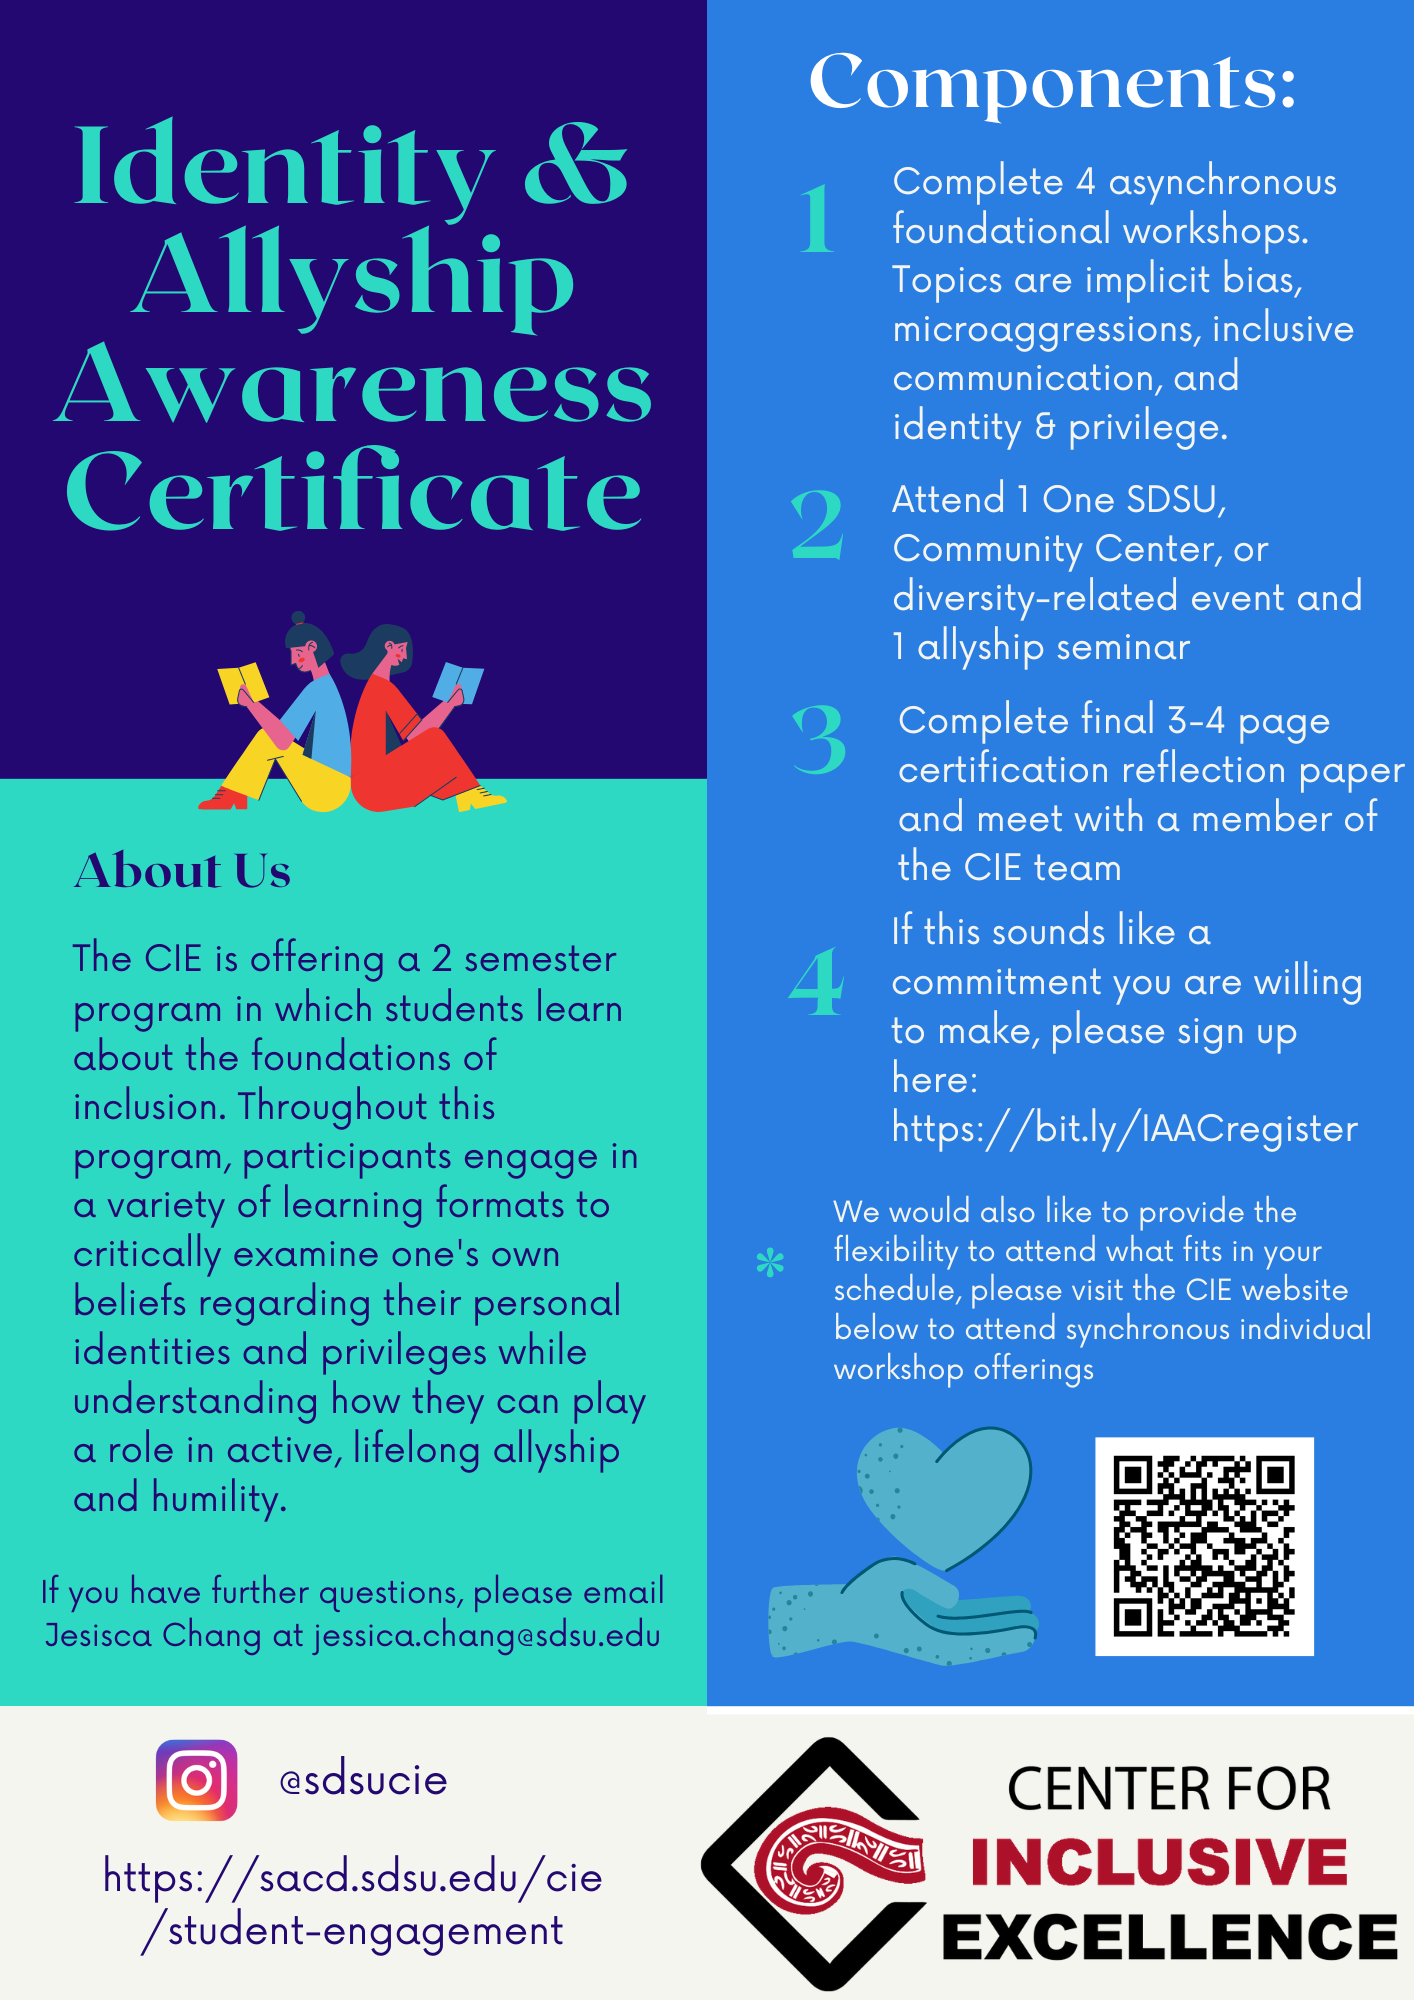 flyer for Identity and allyship awareness certificate offered in 2 semesters to SDSU students to learn about the foundations of inclusion